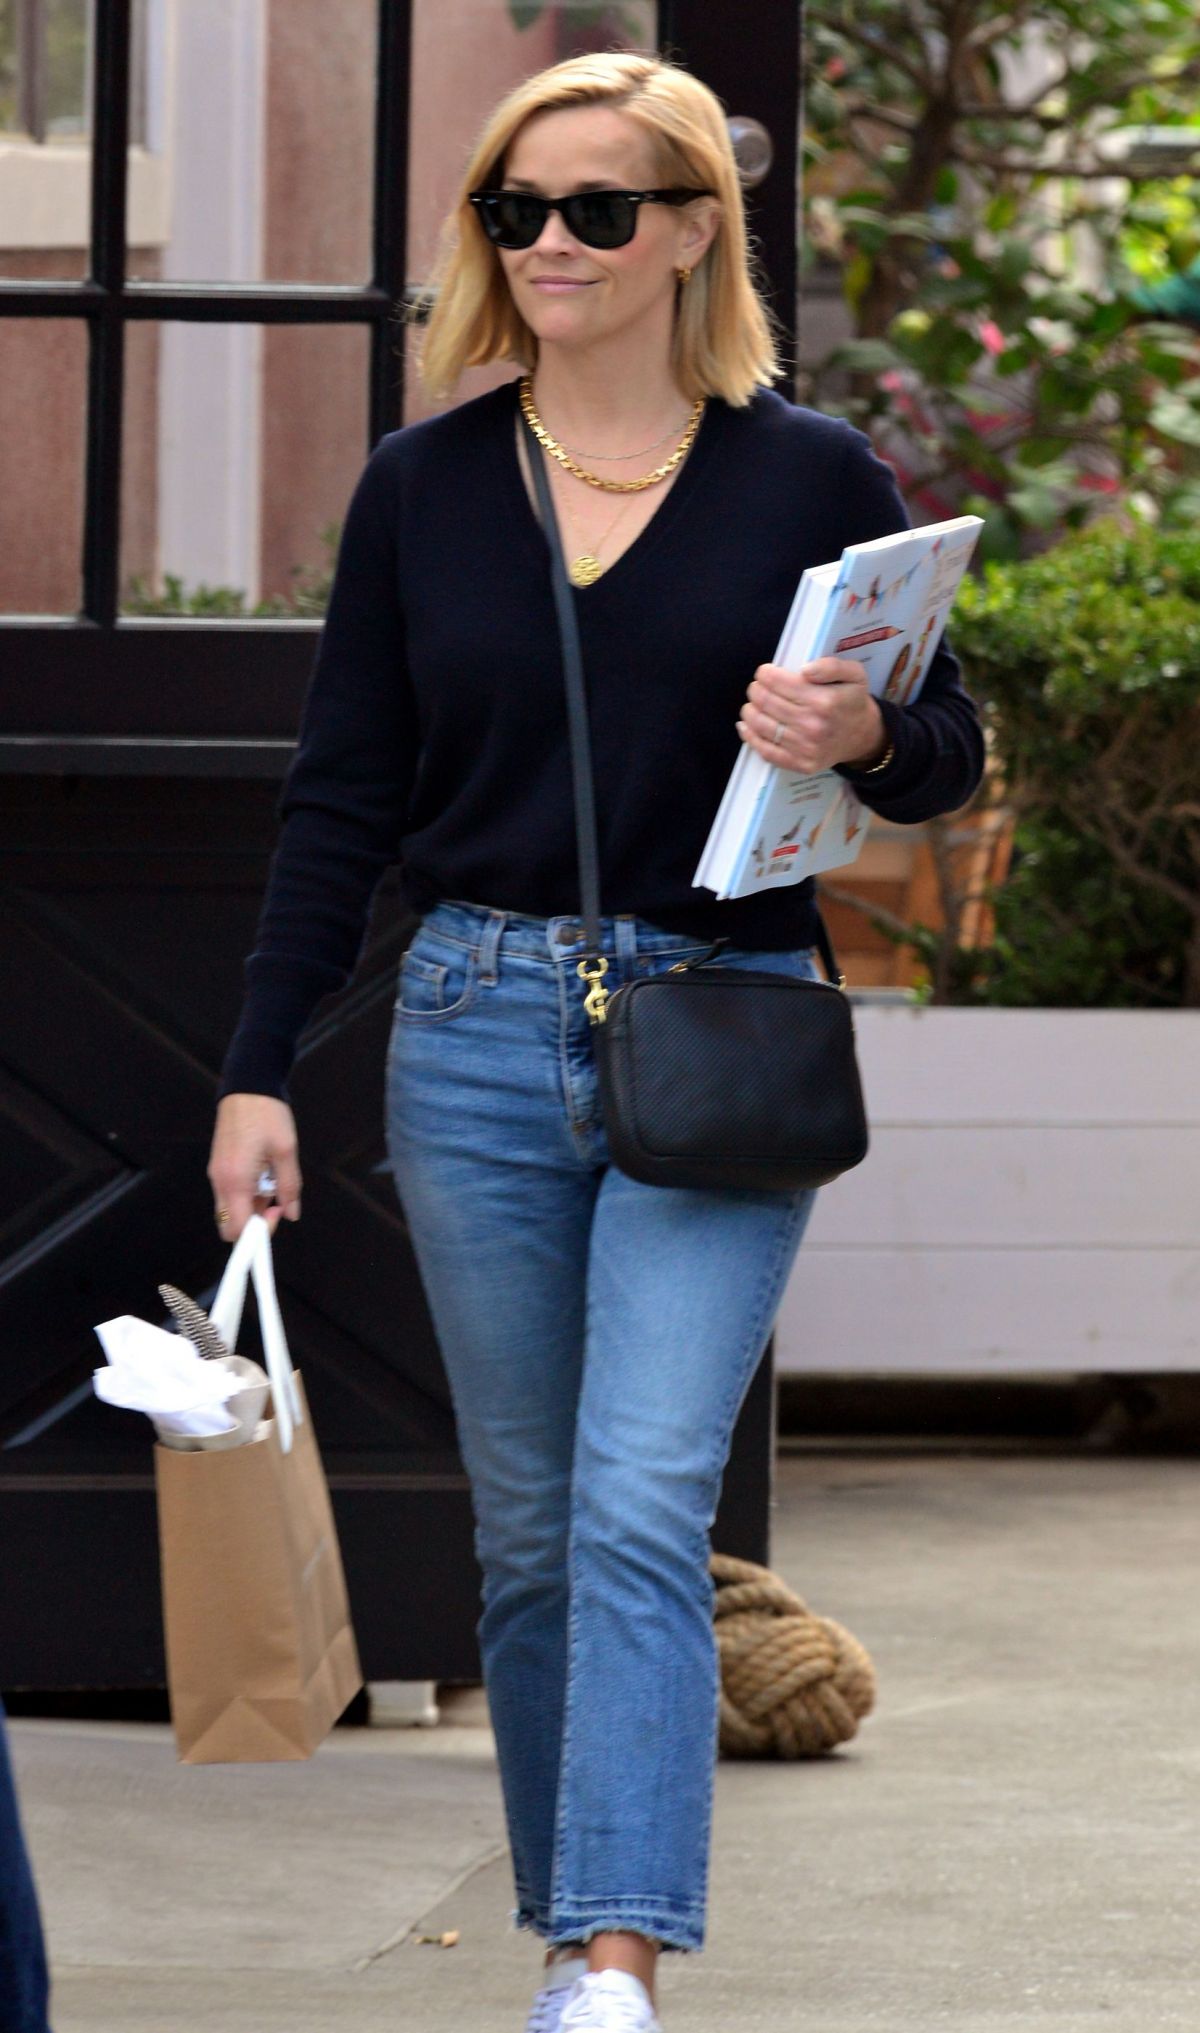 REESE WITHERSPOON Leaves Country Mart in Brentwood 11/06/2019 – HawtCelebs